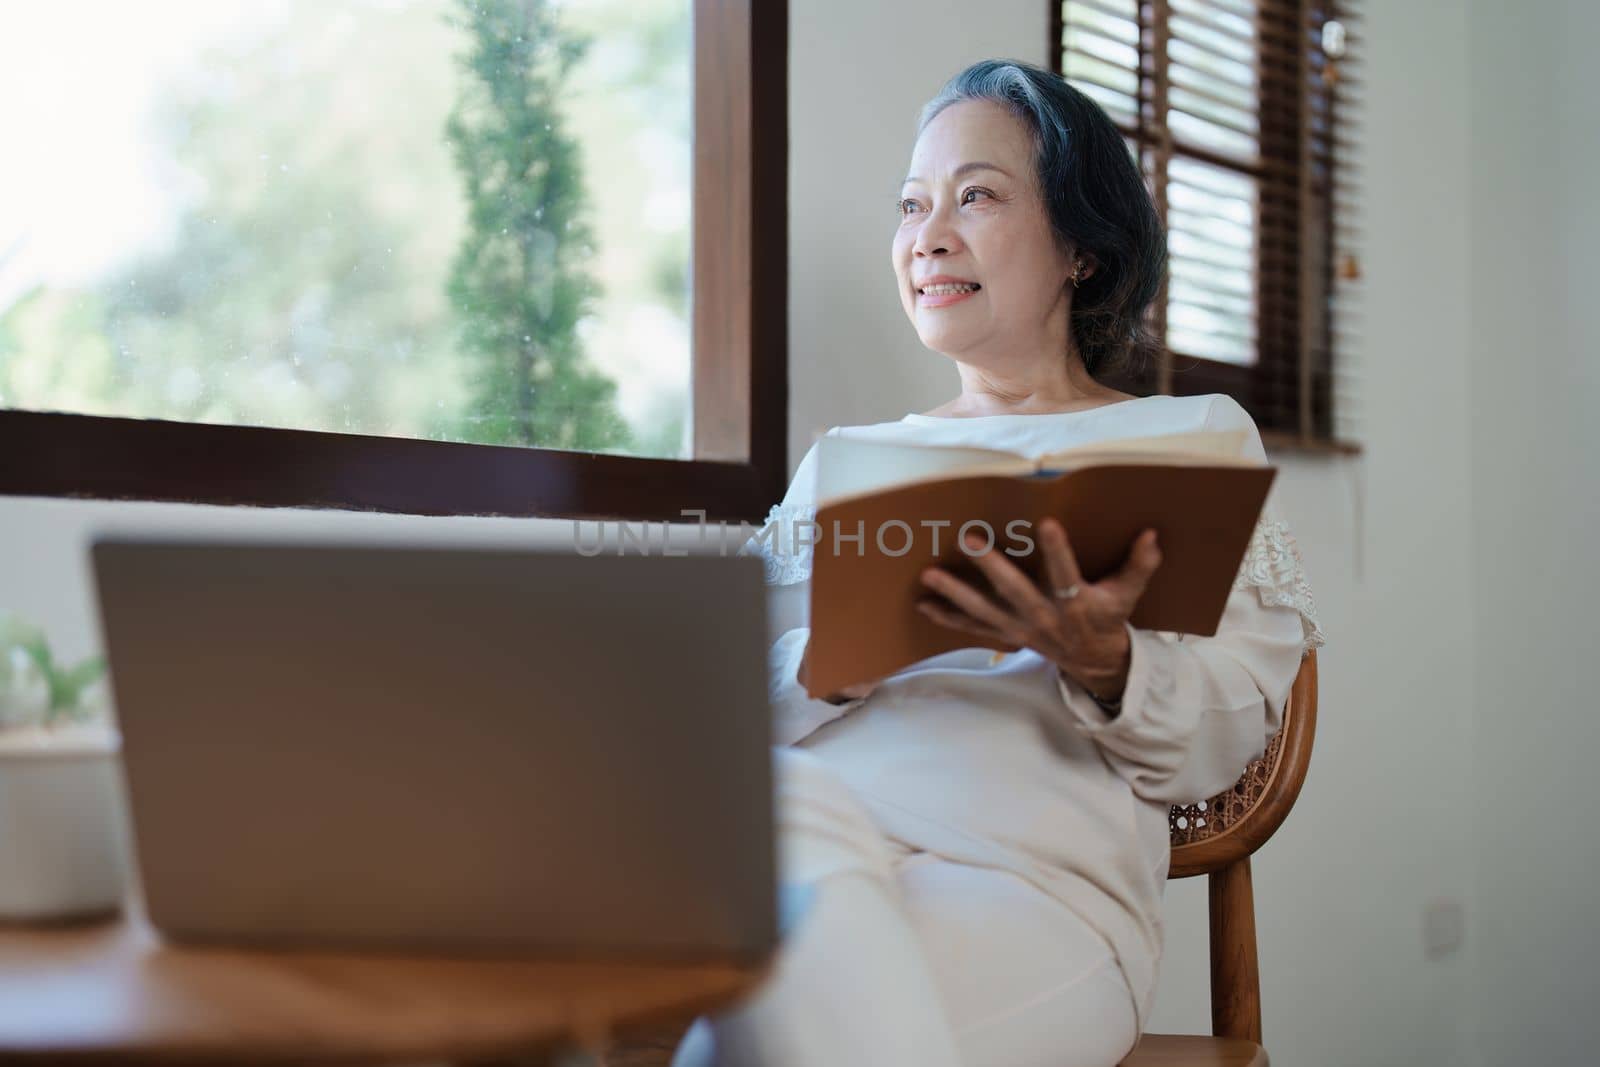 Portrait of an elderly Asian woman in a modern pose holding a memory notebook and operating a computer